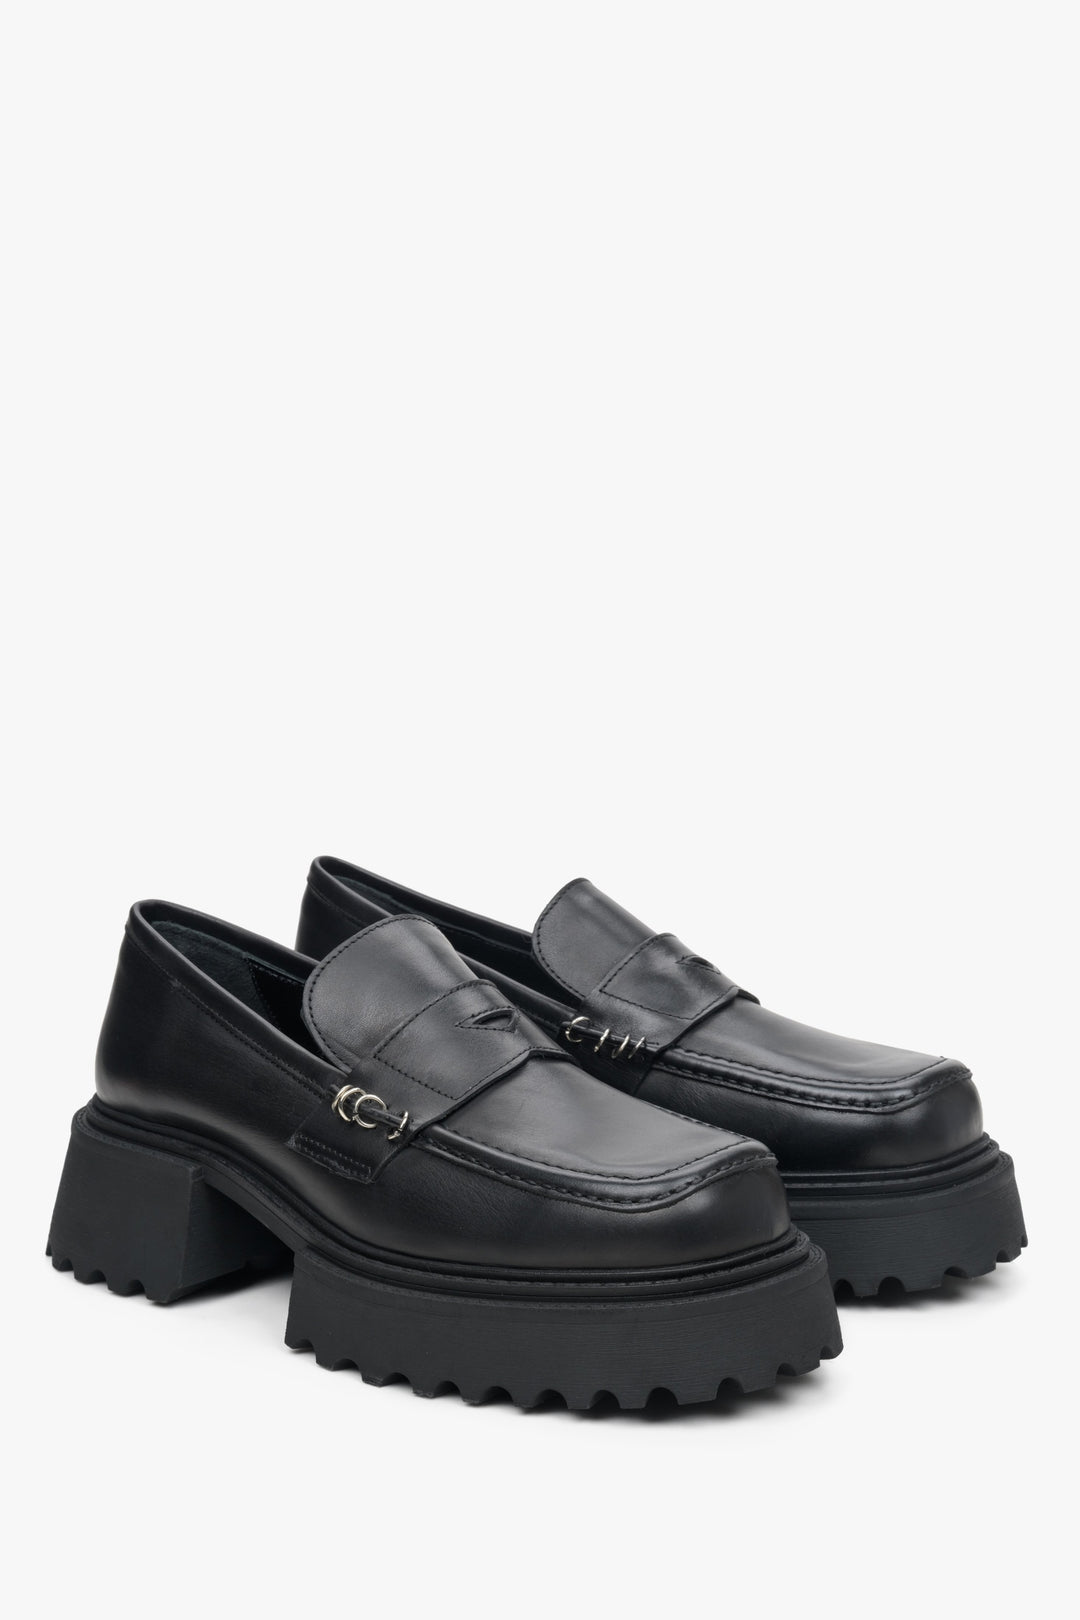 Women's black leather moccasins by Estro with embellishments.